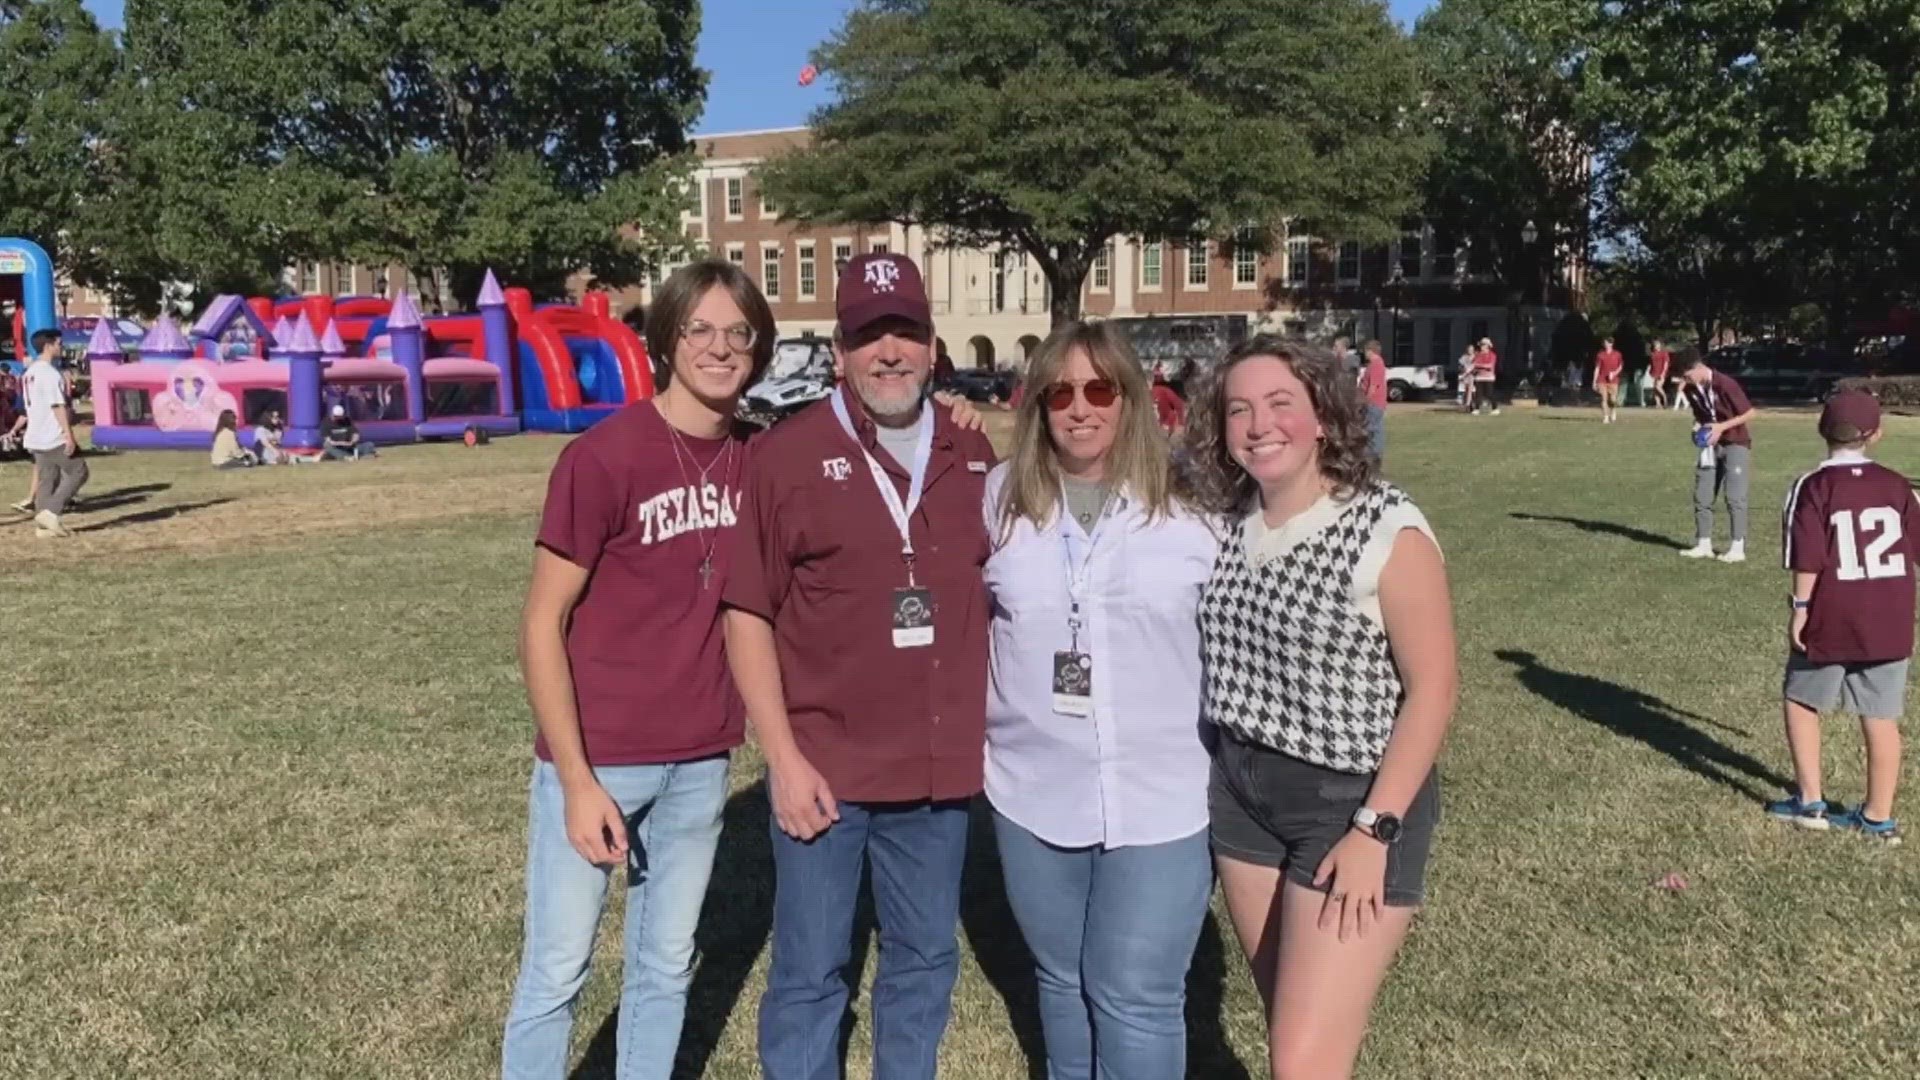 David Jahn, a student at Texas A&M University, said he's enjoyed watching the rivalry between A&M and Alabama for years with his family.